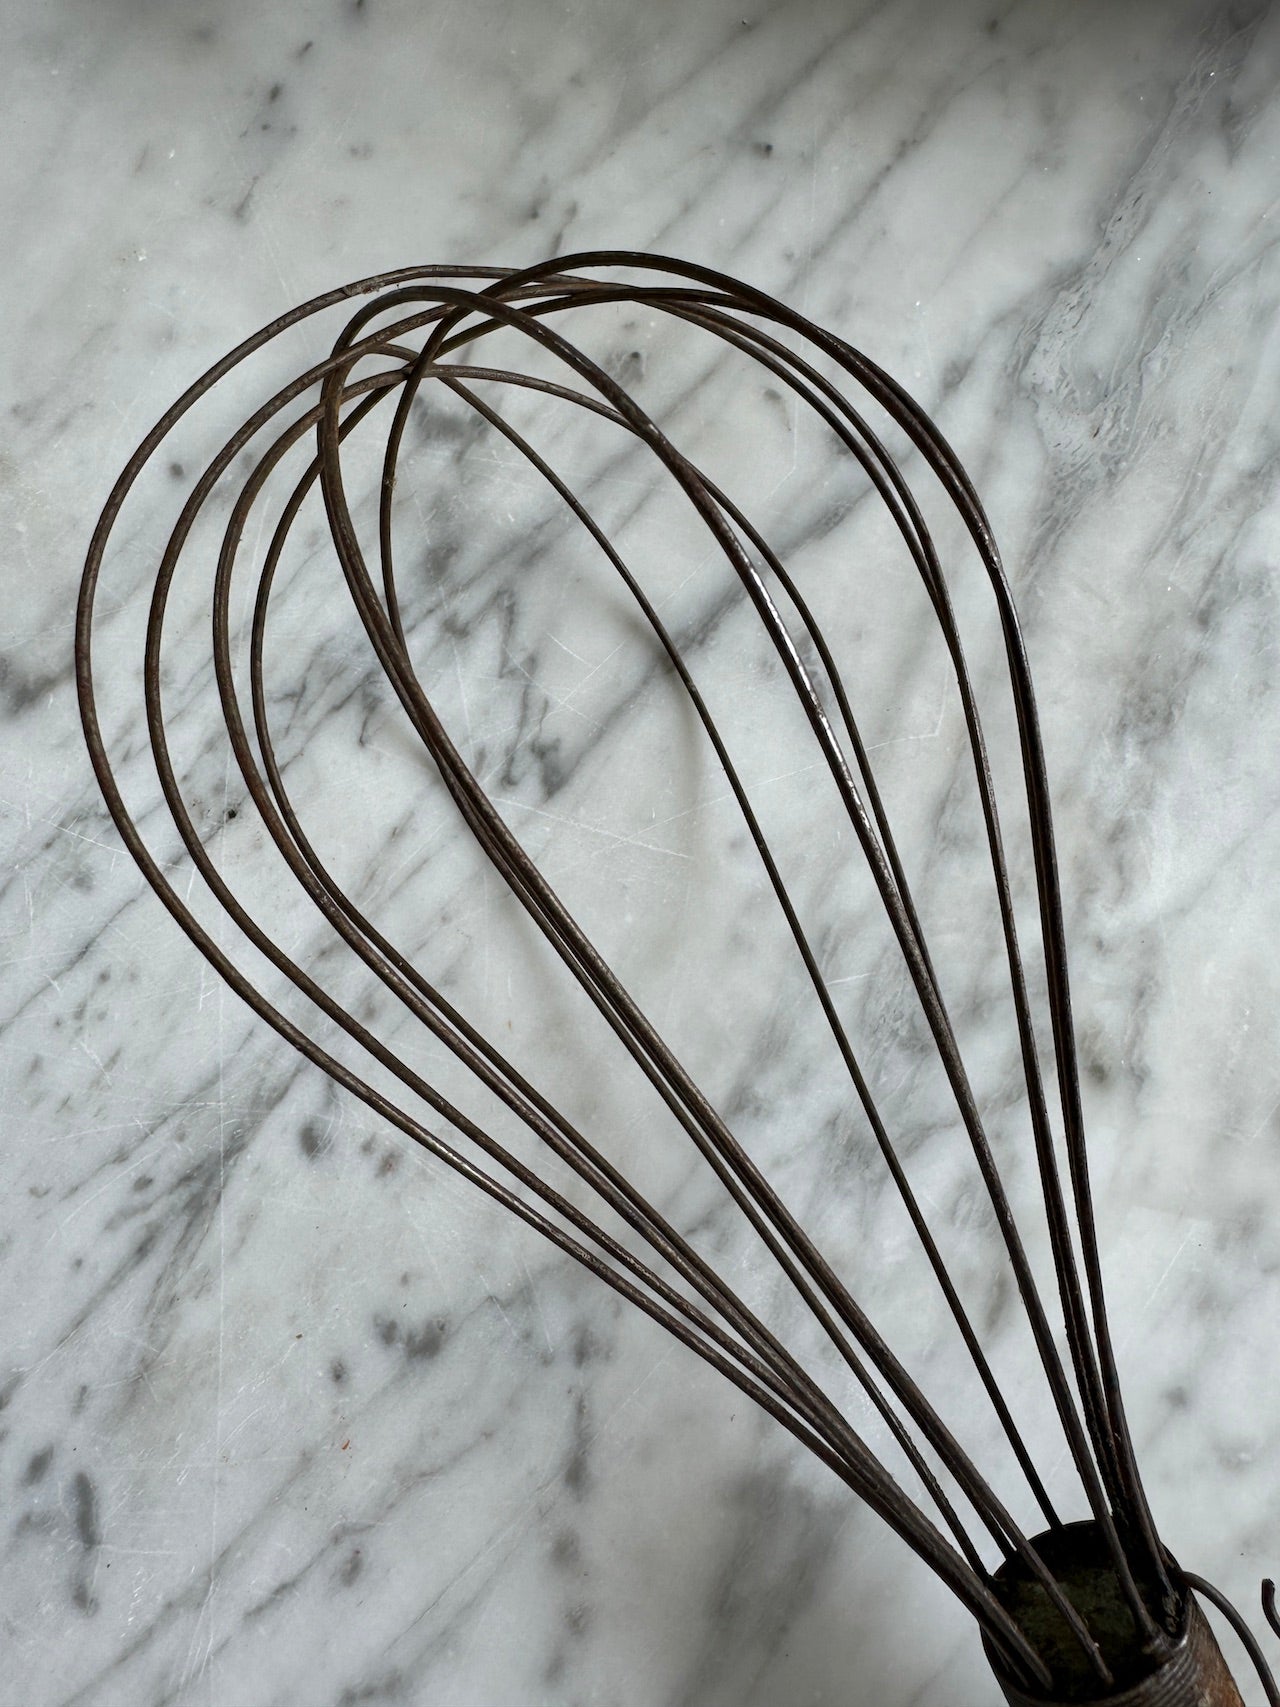 Vintage French extra large chef's whisk